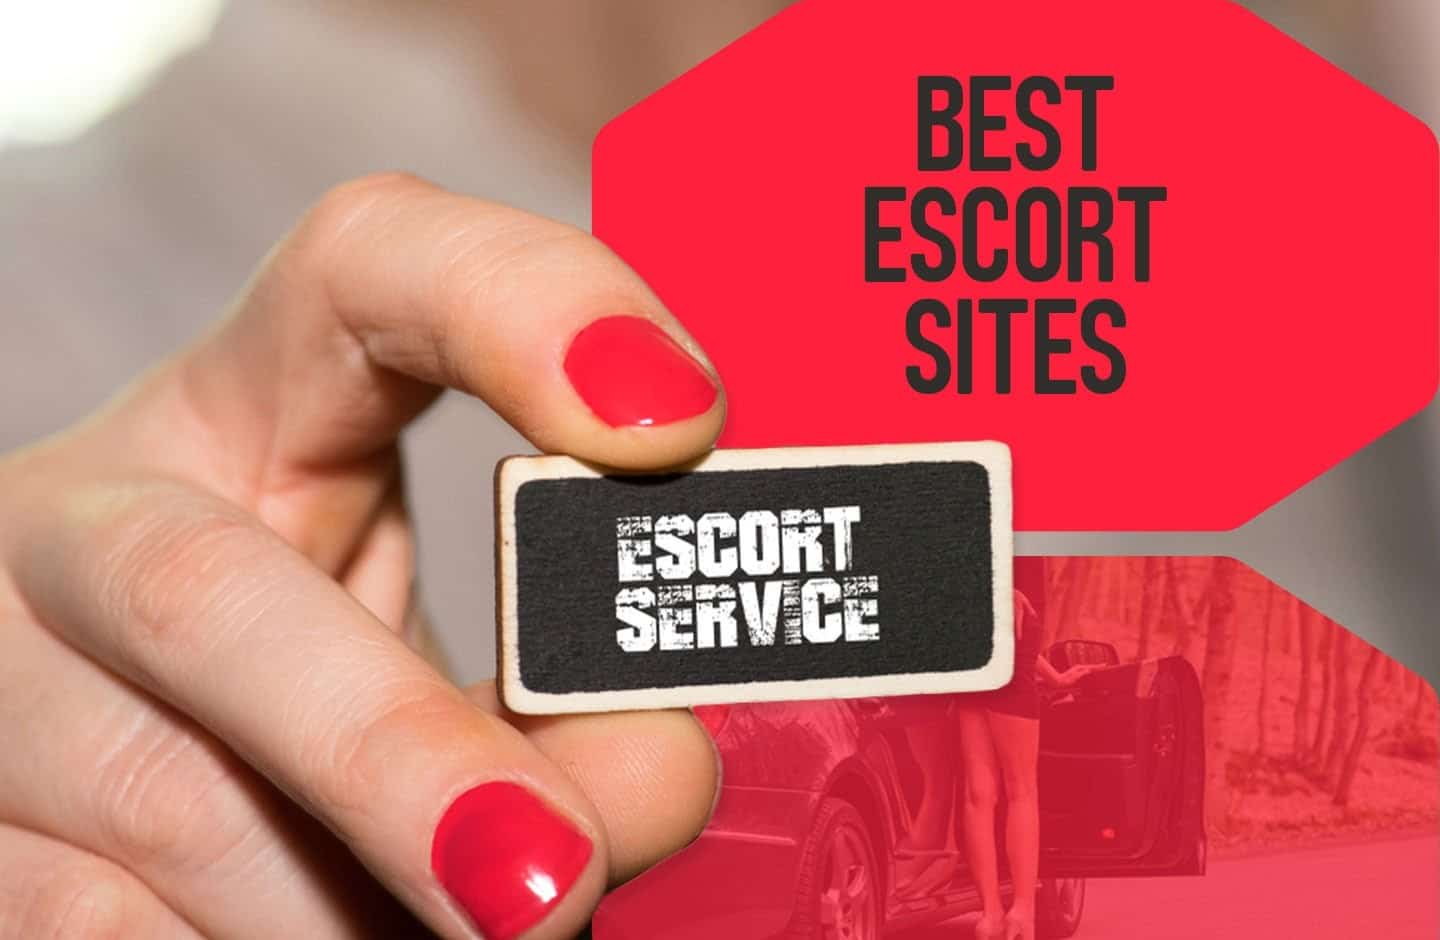 The Ultimate Guide to Fort Myers Escorts: Everything You Need to Know